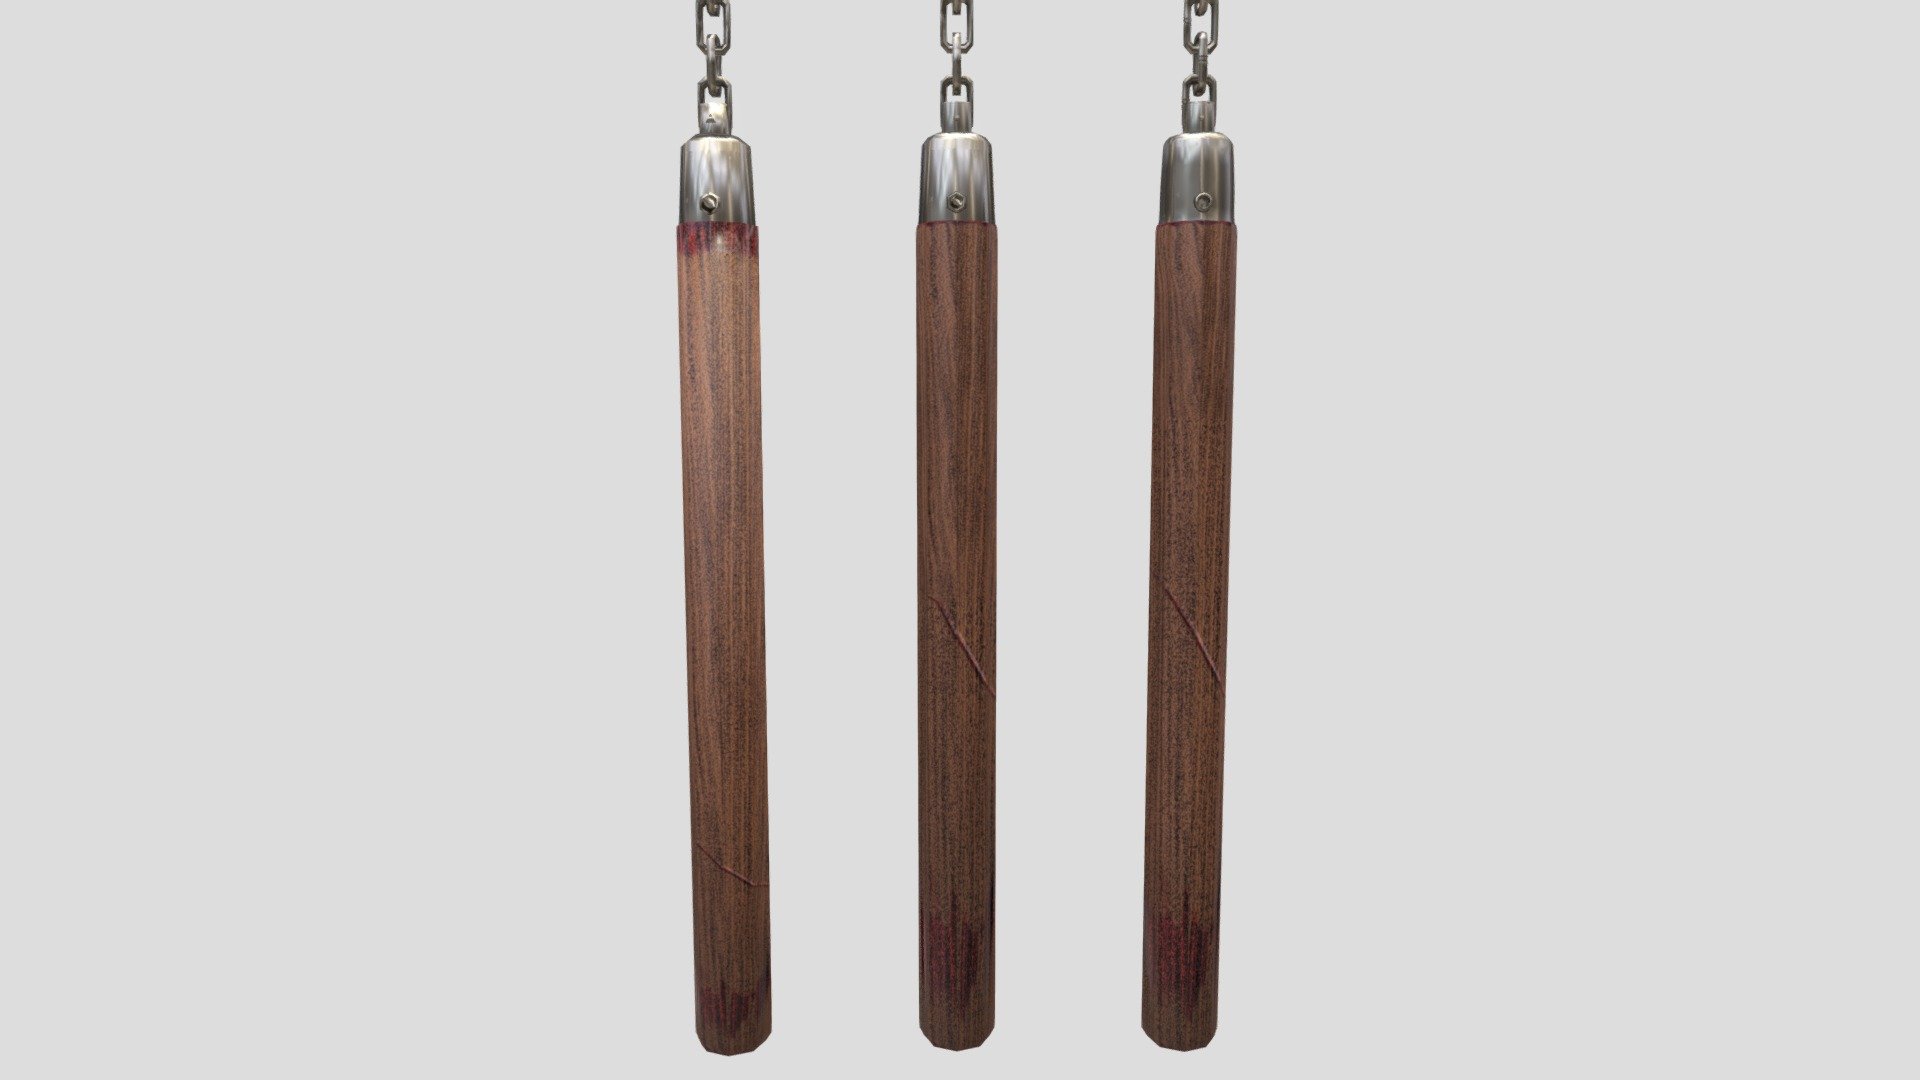 Wooden Straight Octagon Chain Nunchaku




Geometry Built In 3ds max -
Normal Map Sculpted in Zbrush



From Left to Right
 L.O.D. 2 - 980 Tris
 L.O.D. 1 - 2092 Tris
 L.O.D. 0 - 4,944 Tris

Doesn't look the best without it's macrovariation from Unreal, for those renders&hellip; Checkout my Artstation:
 https://www.artstation.com/jan_strydom

Not rigged or skinned yet, but I do plan on doing that whenever I have free time. Can't wait to add some animations with these bad boys. So look out for that in the coming months.

How I learned to make this wood diffuse texture in Photoshop:
https://www.youtube.com/watch?v=knZVq2kAYH8&amp;list=WL&amp;index=5&amp;ab_channel=PaulMotisi



Made to better understand designing L.O.D.s in my 3D modeling and Rendering II class

Shout out to my Professer Vincent!

CHECK HIS STUFF OUT OVER HERE:

https://www.youtube.com/channel/UClpkHus6YzgG8JVMecBRFIg

https://twitter.com/YHWHGames - Wooden Chain Nunchaku _2022 - 3D model by Jan_Strydom (@JanStrydom) 3d model